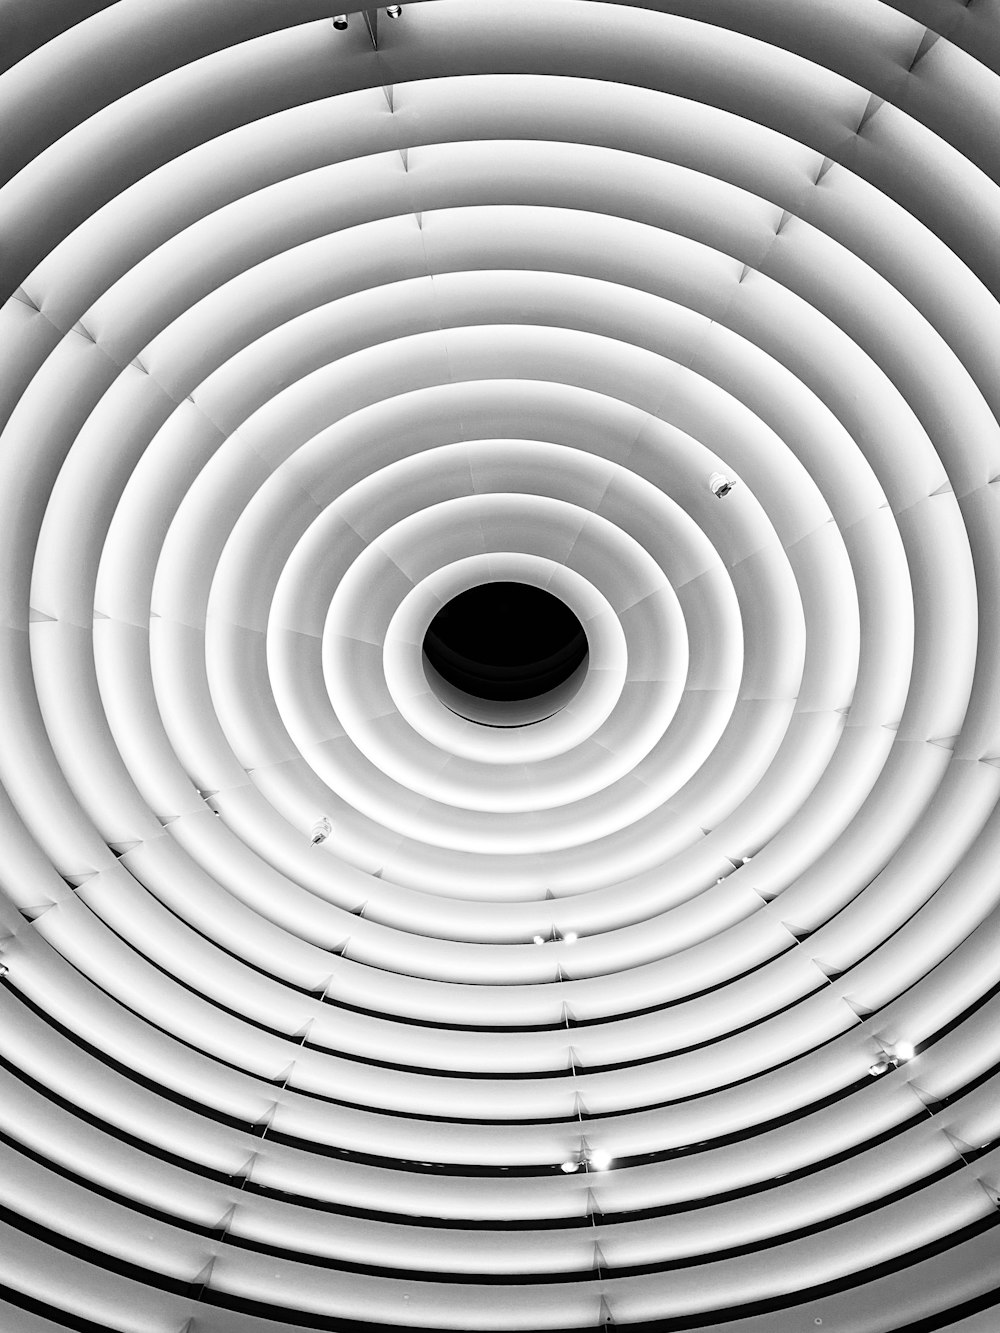 a black and white photo of a circular ceiling